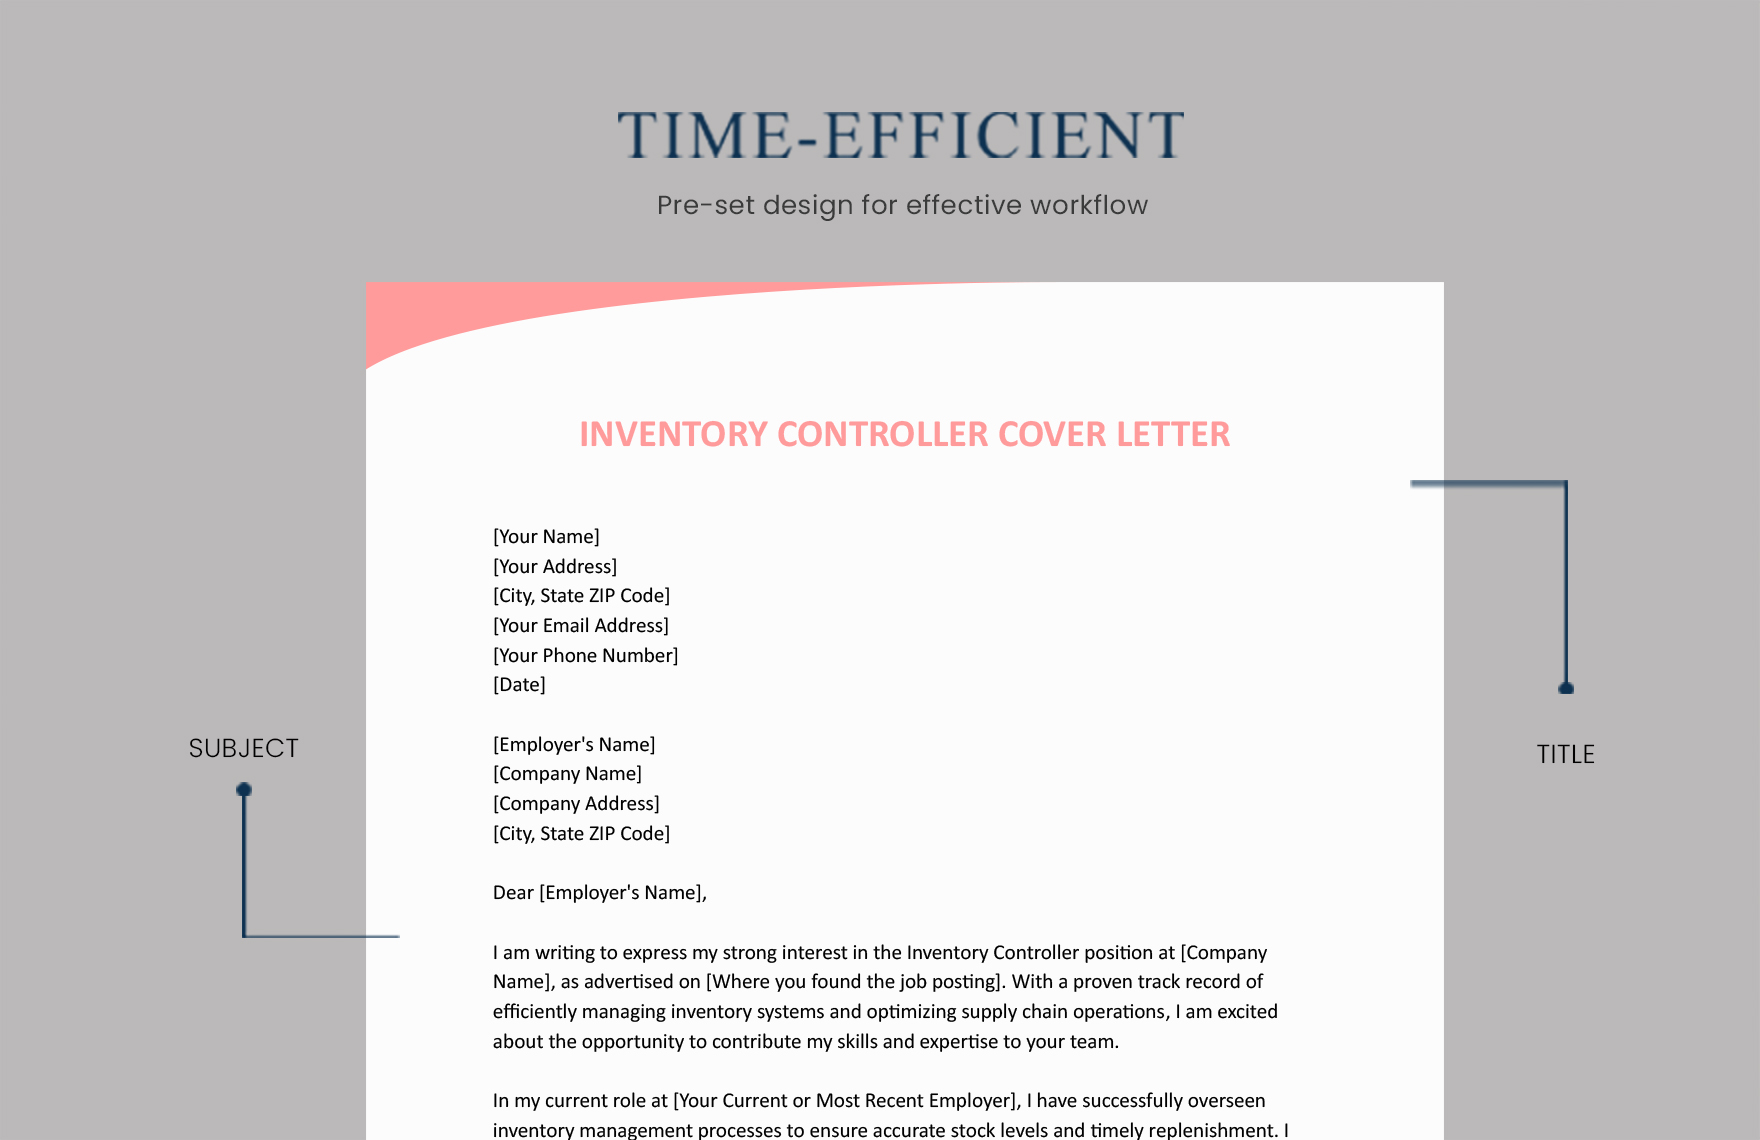 Inventory Controller Cover Letter